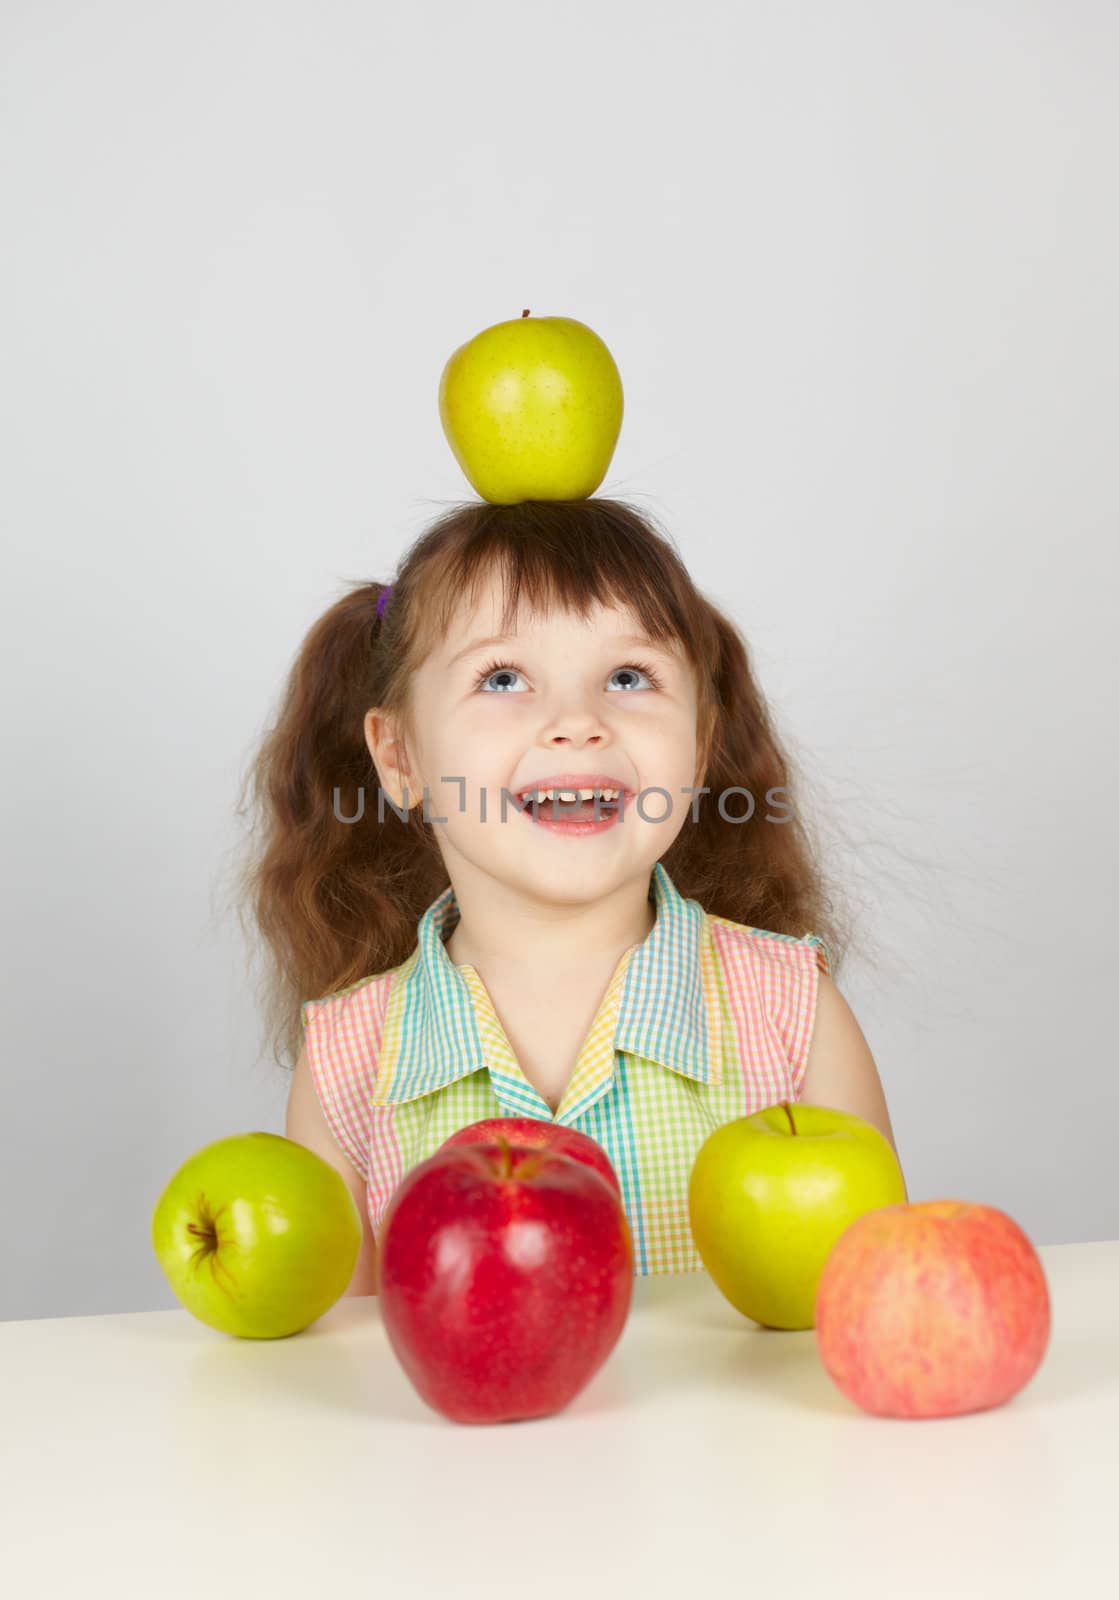 Green apple on the head of a cheerful girl